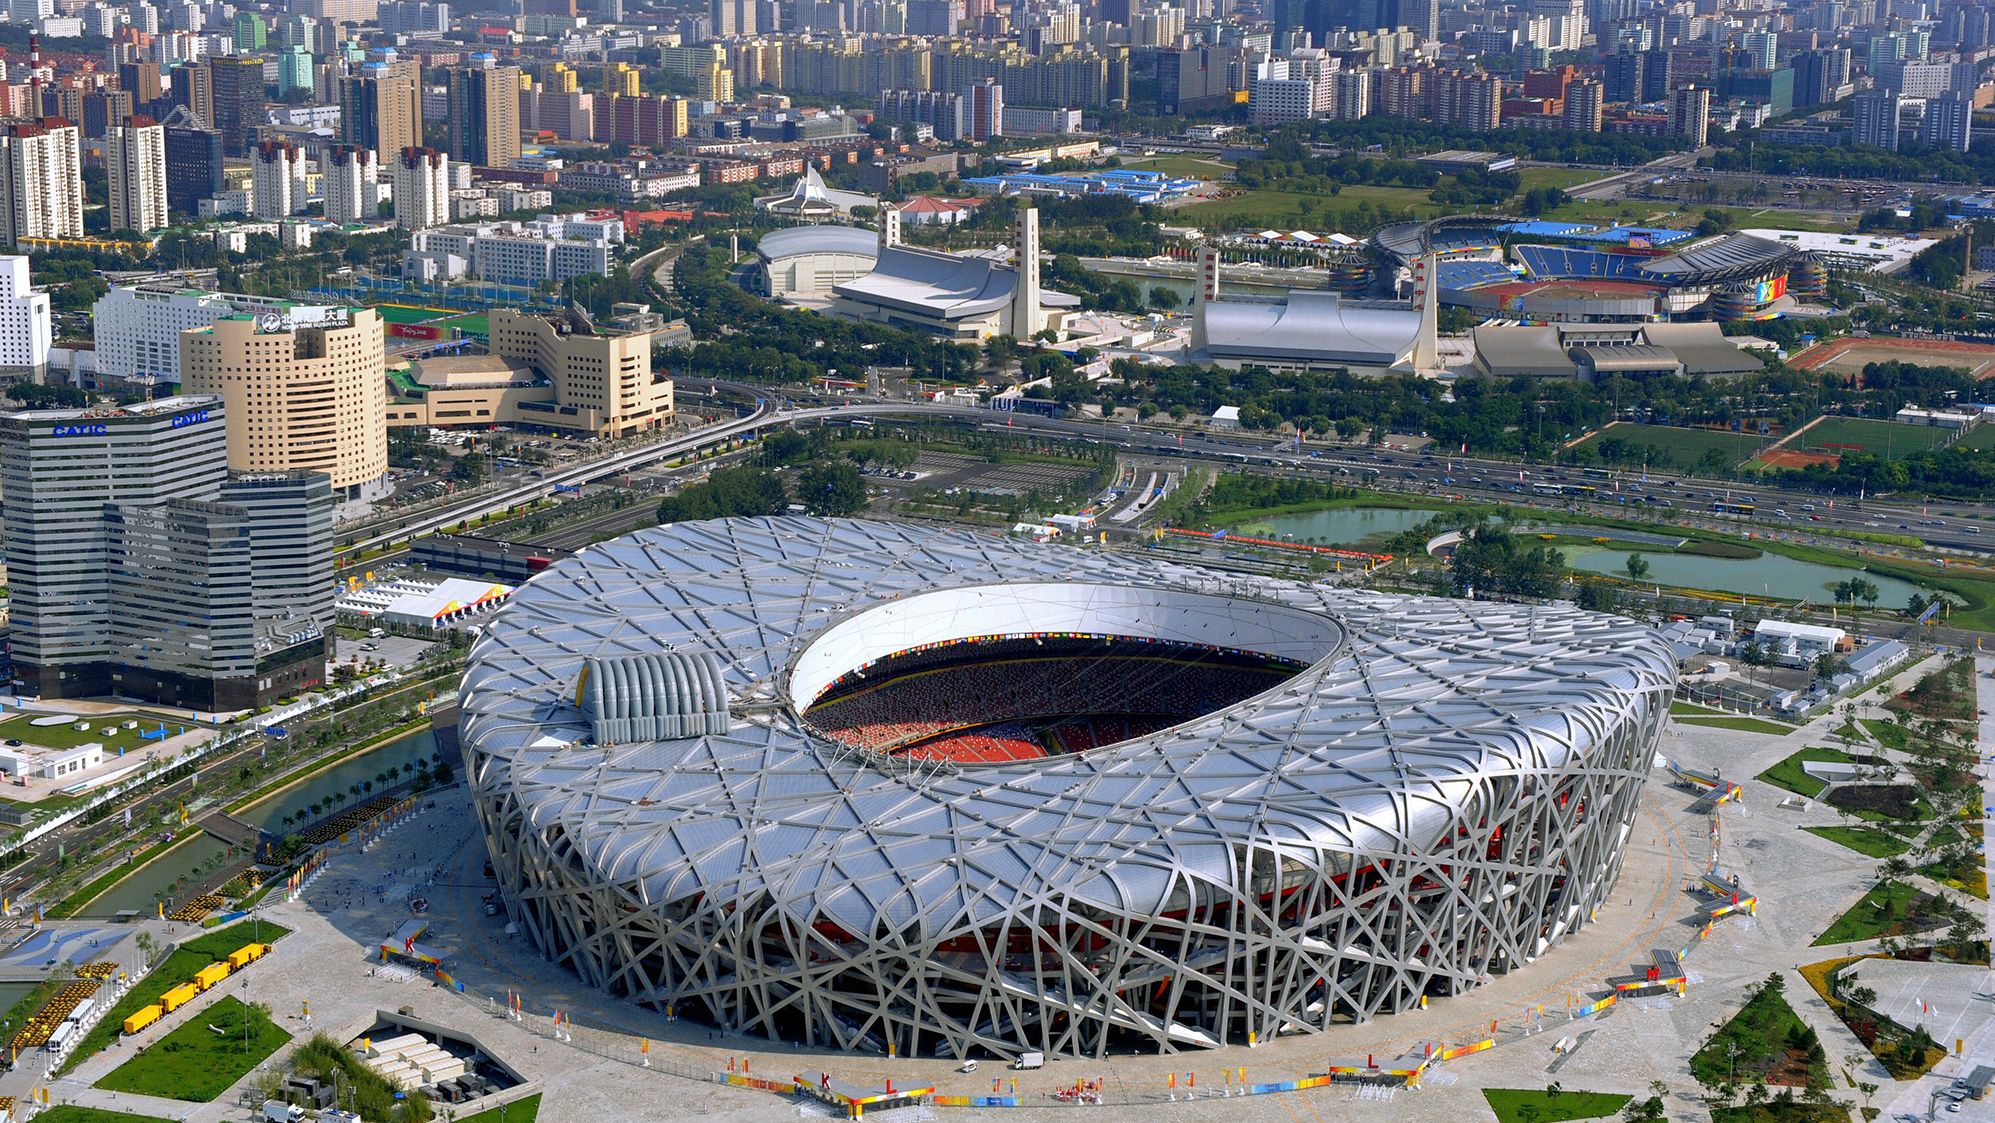 The National Stadium, also known as the "Bird's Nest," was a centerpiece of the 2008 Olympic Games in Beijing. 